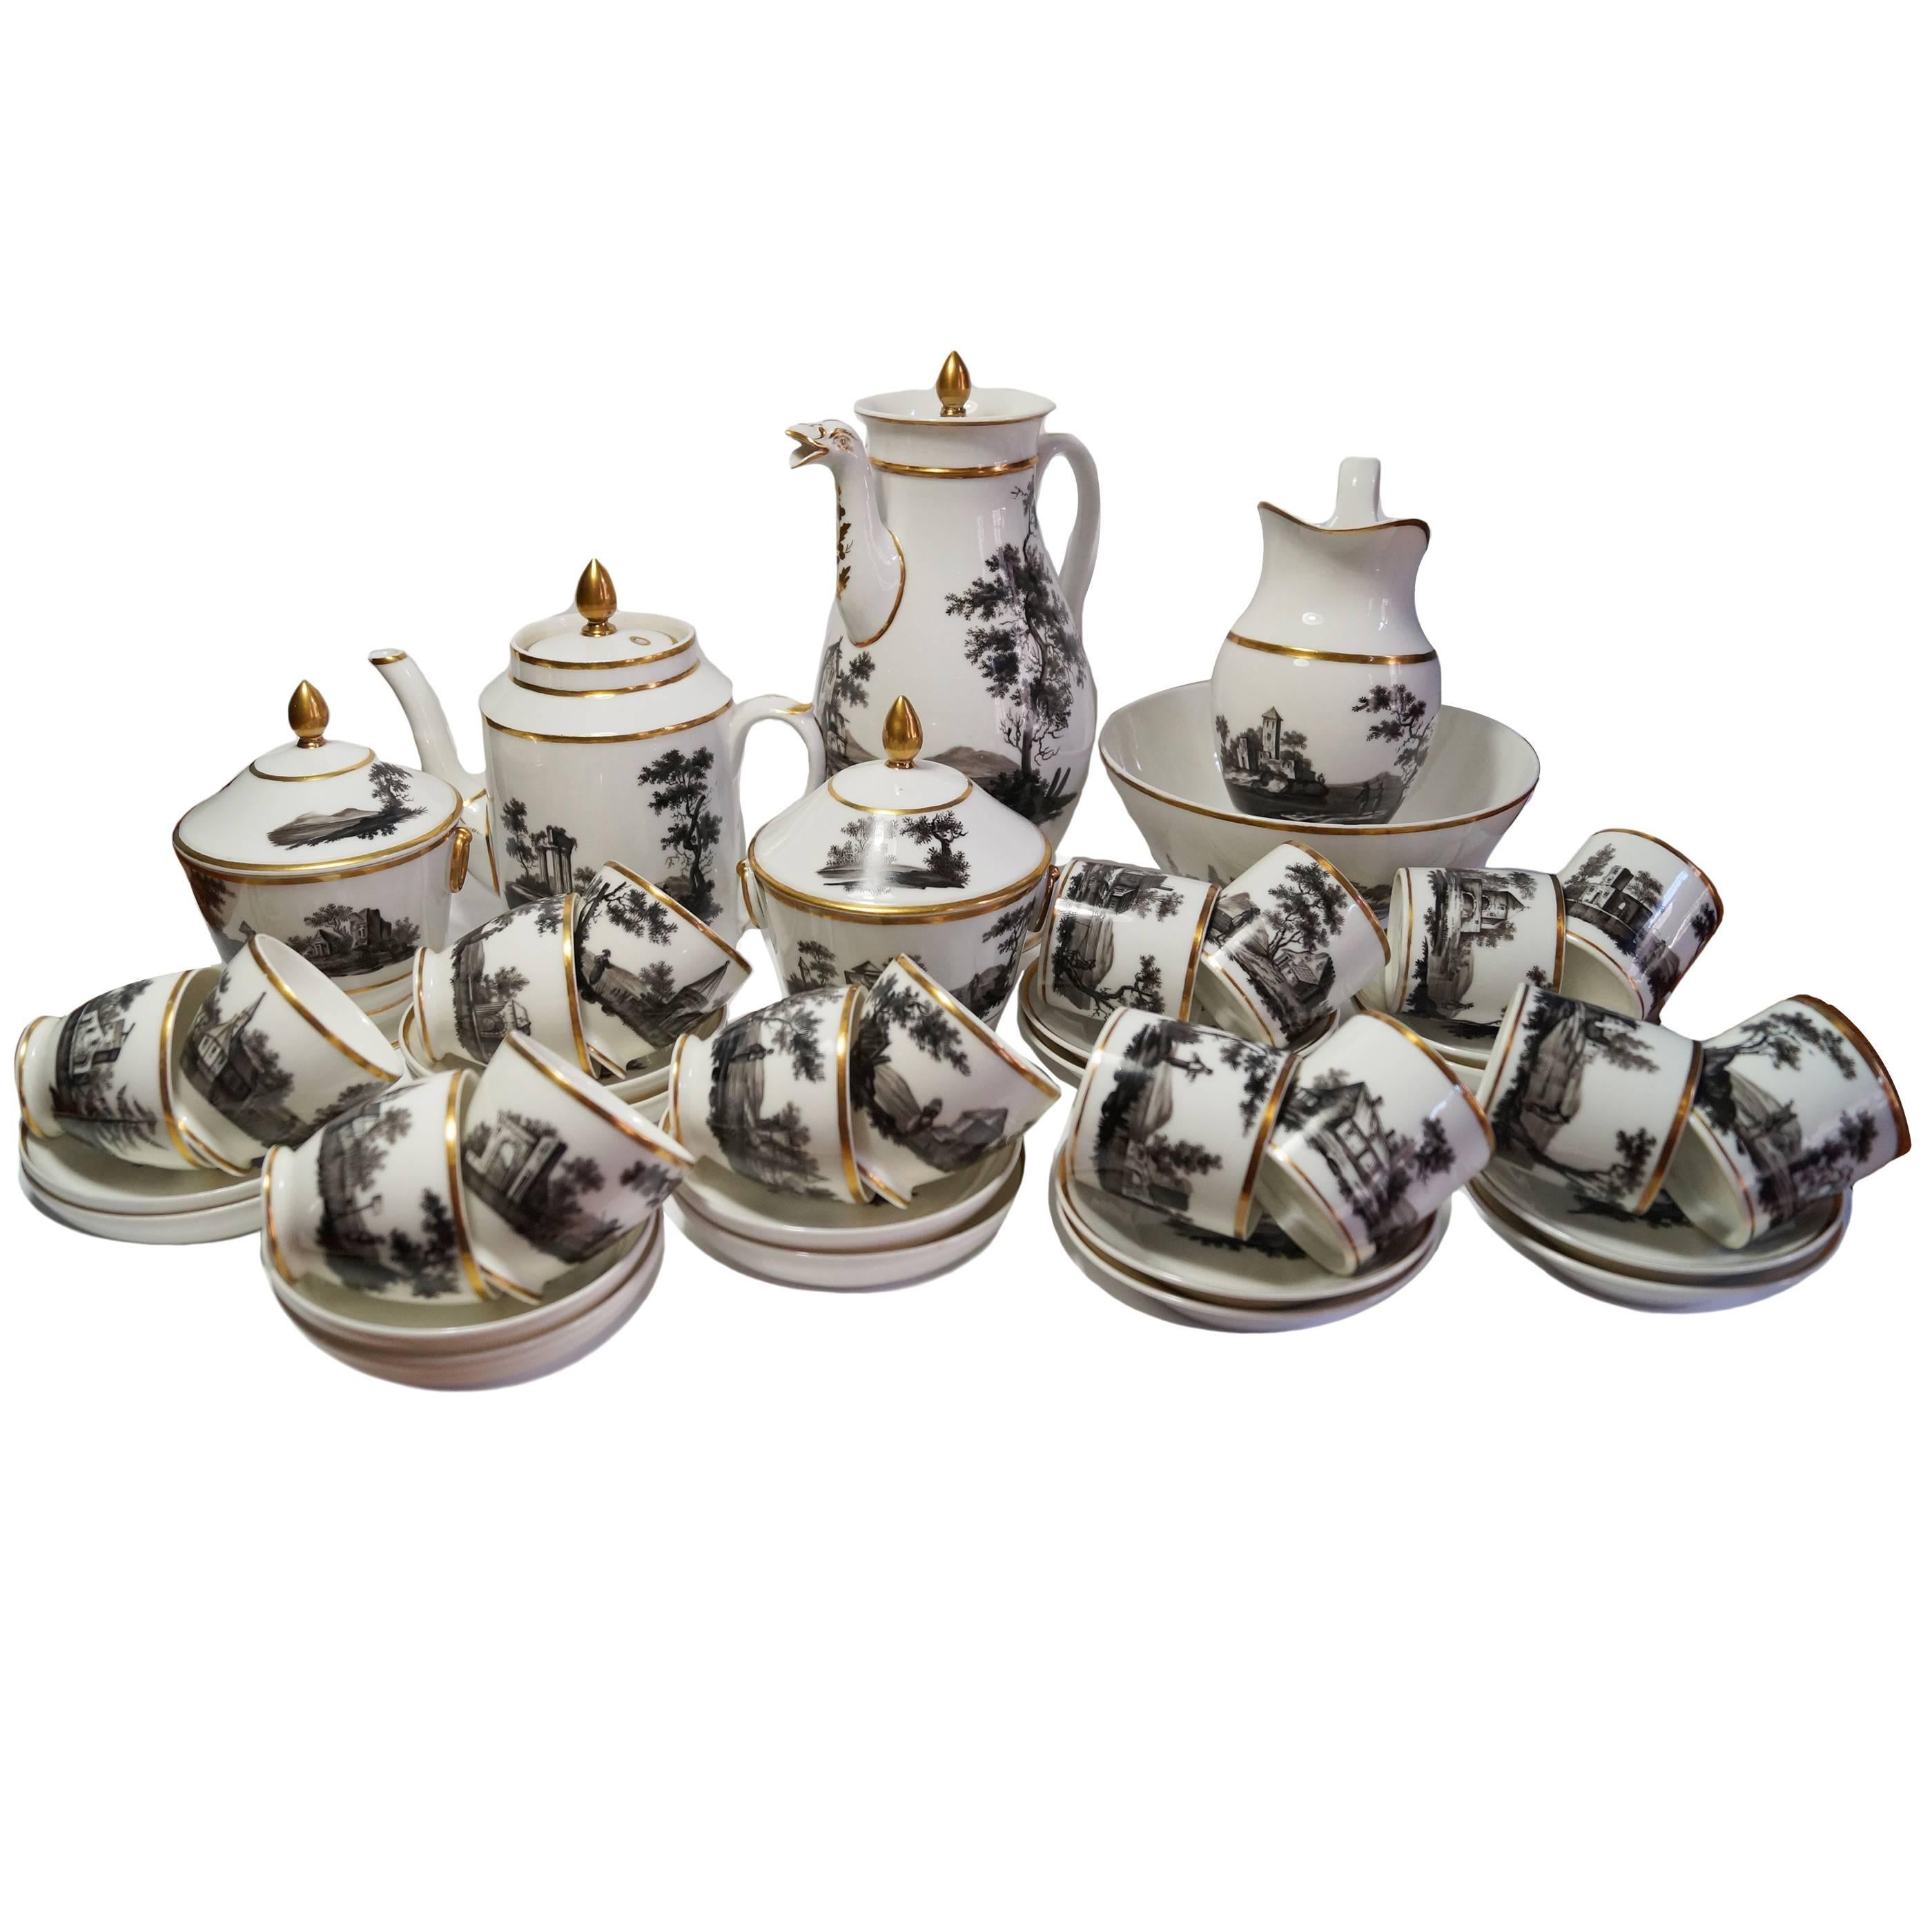 Hand-Painted Black and Sepia 'Old Paris' Porcelain Coffee and Tea Service